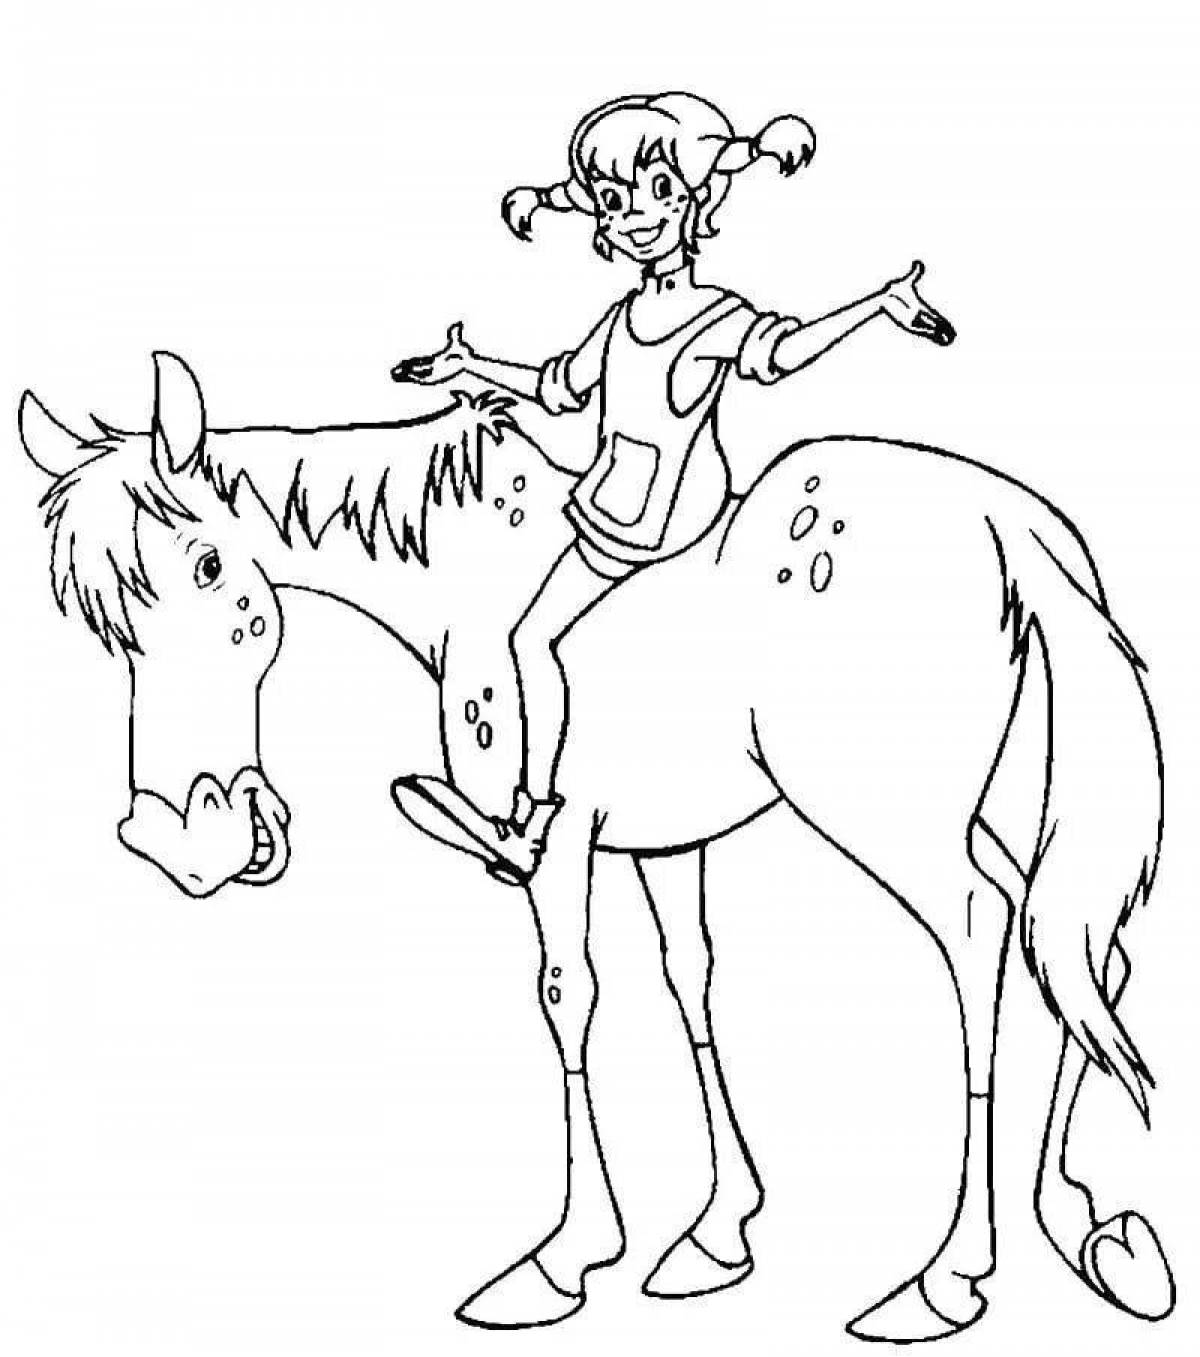 Amazing pippi longstocking coloring page